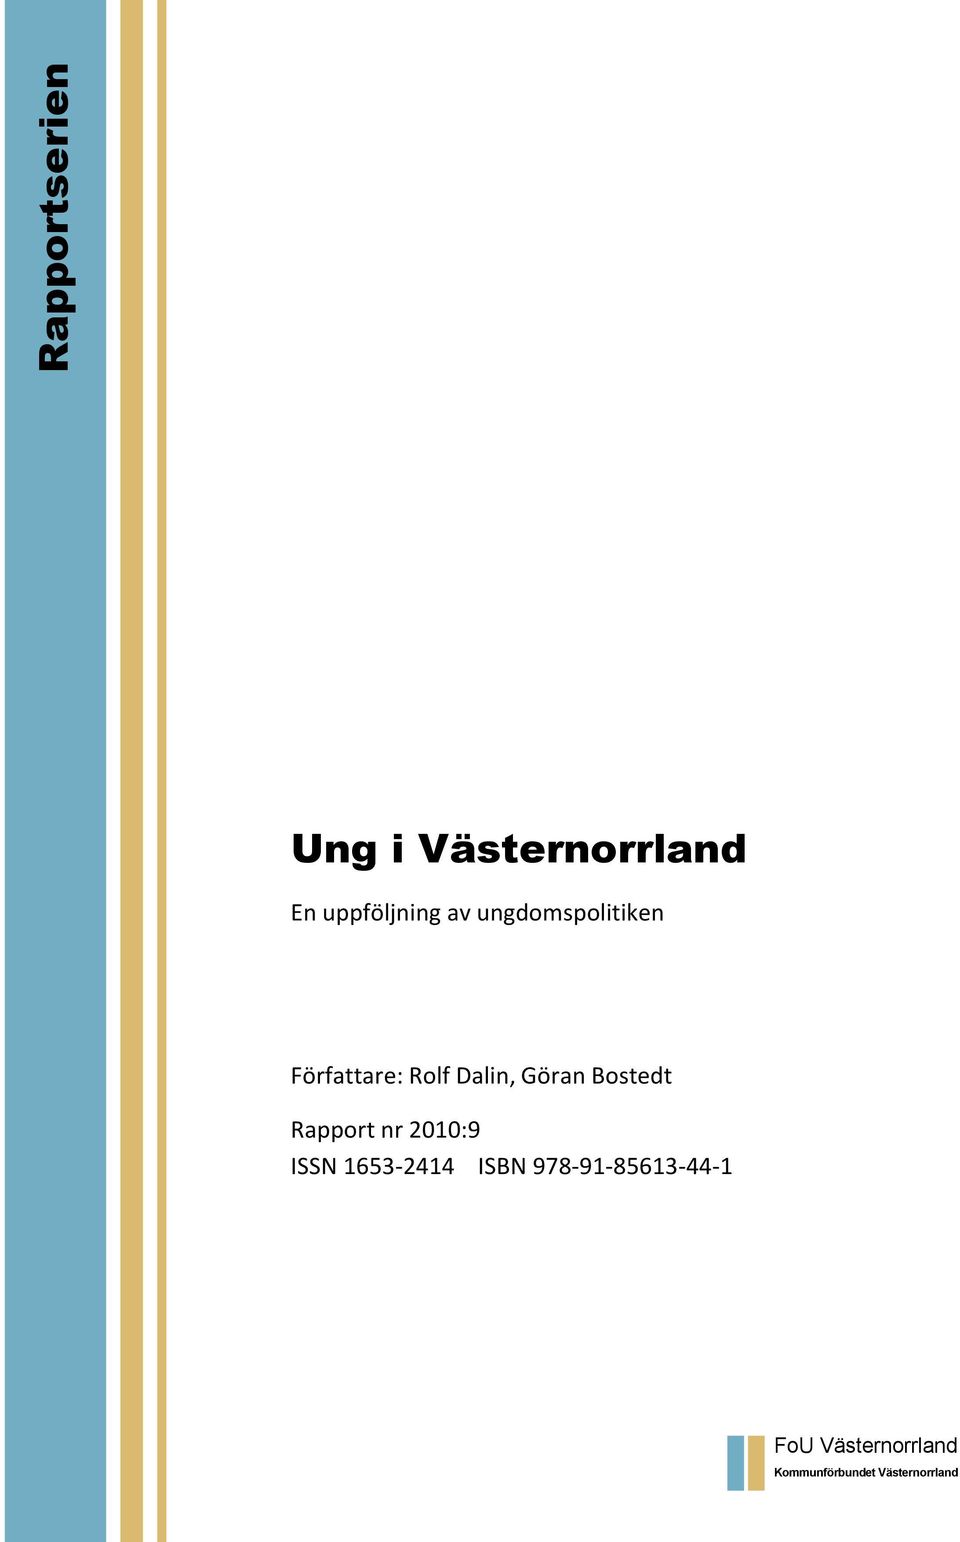 Bostedt Rapport nr 2010:9 ISSN 1653-2414 ISBN